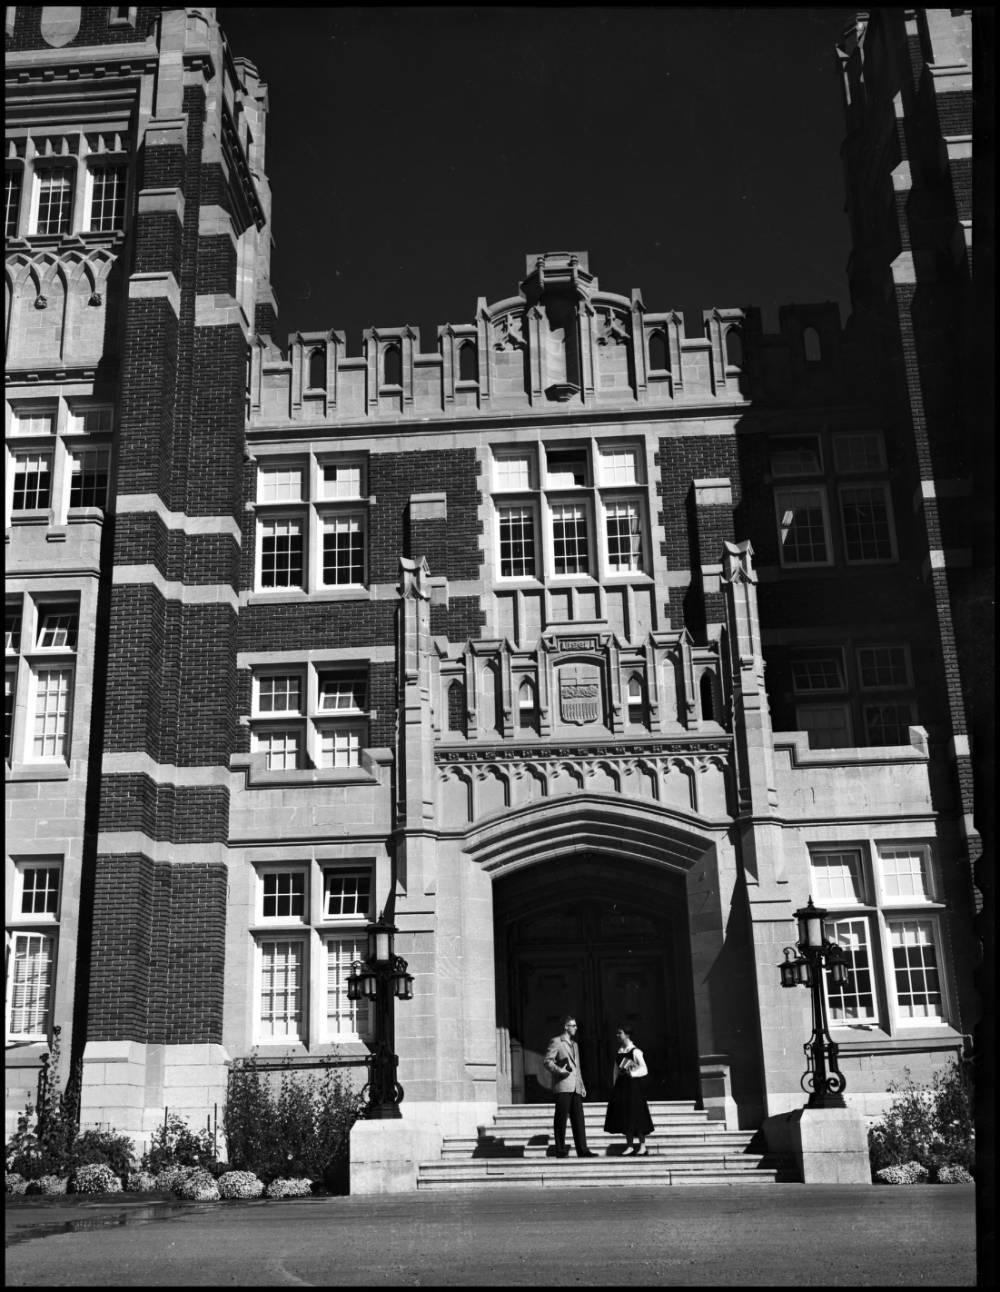 The main entrance of Heritage Hall (now part of SAIT campus) at the start of the 1954 fall term at the Calgary branch of the University of Alberta